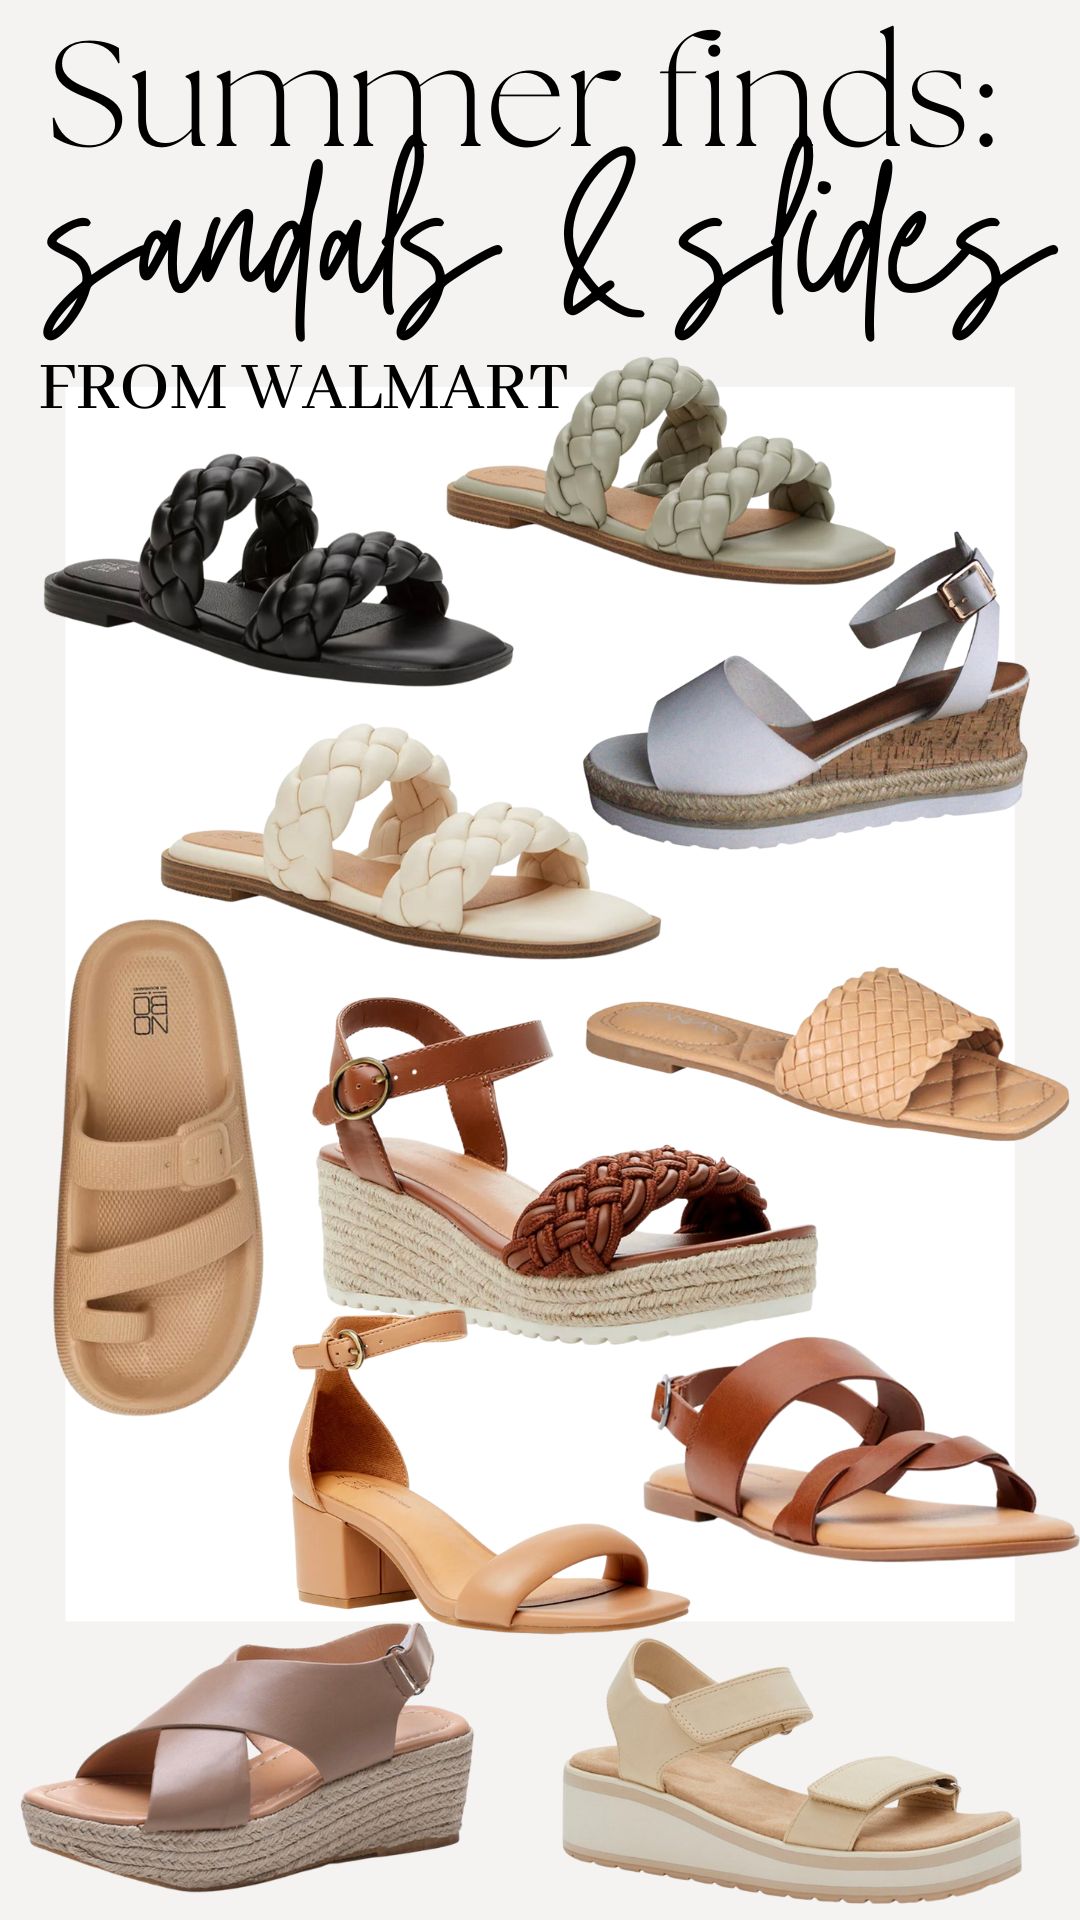 Affordable summer styles from Walmart sandals and wedges for summer